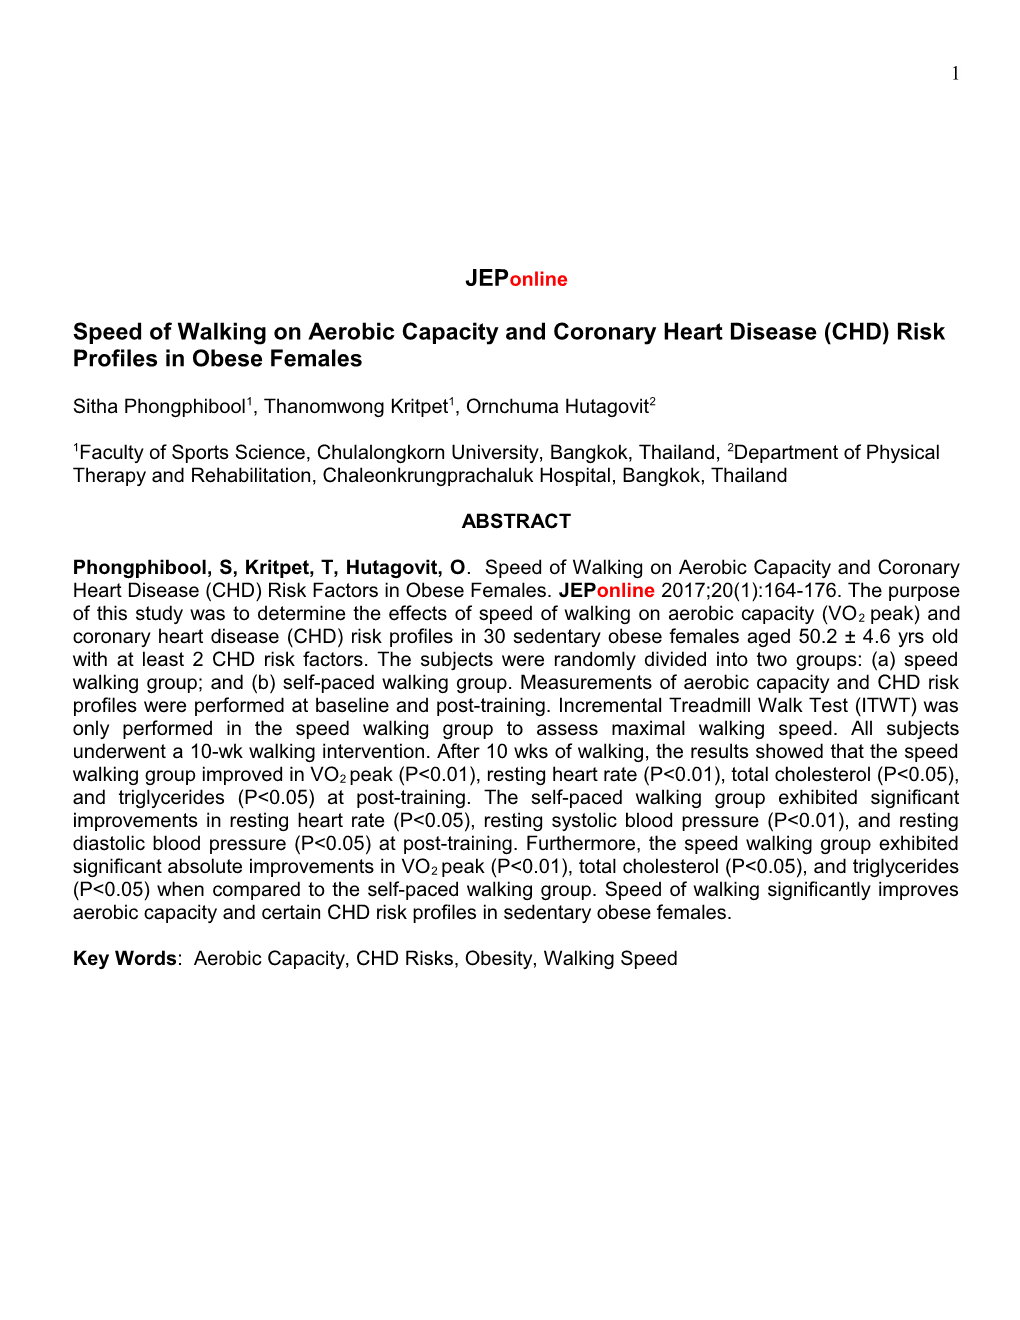 Speed of Walking on Aerobic Capacity and Coronary Heart Disease (CHD) Risk Profiles In